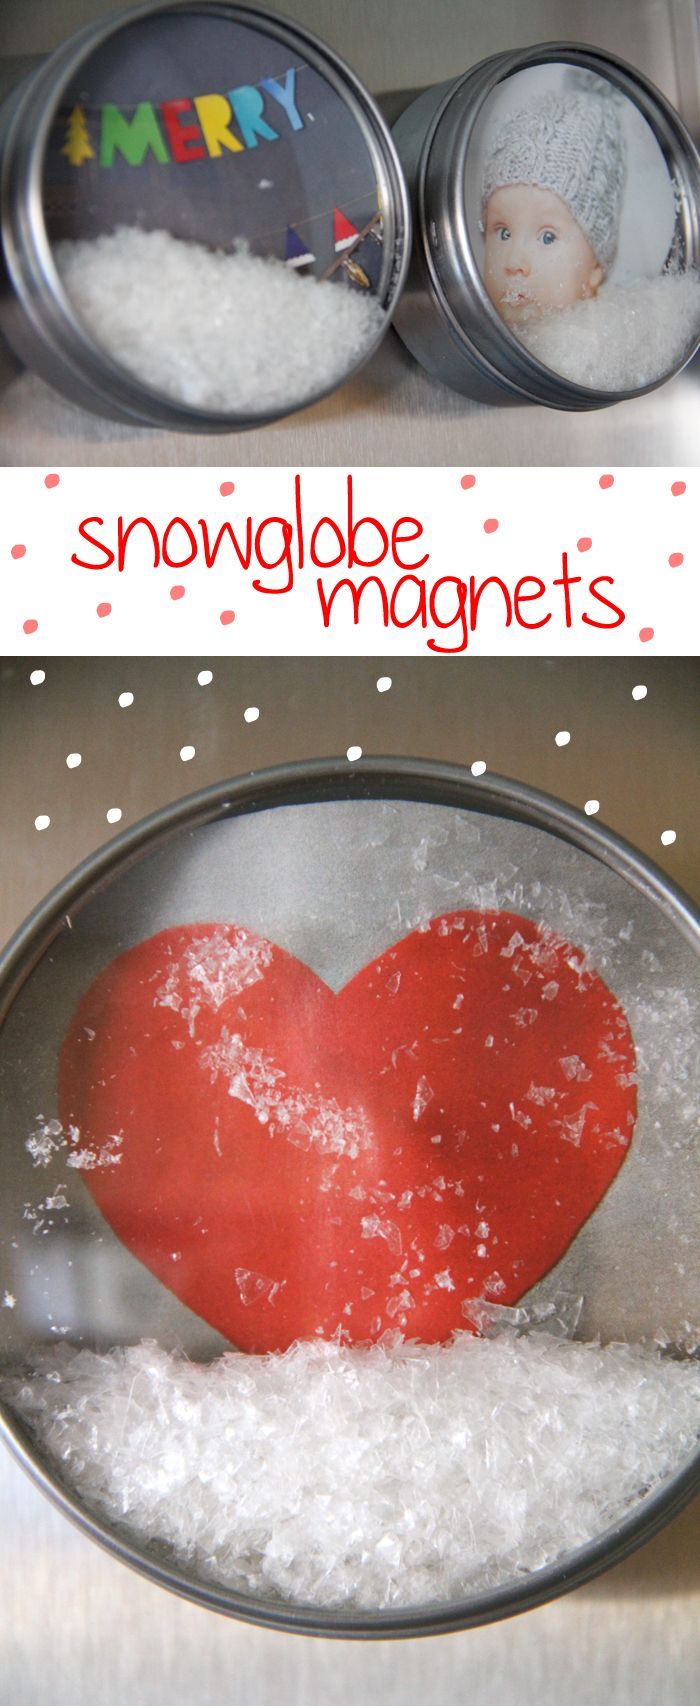 Snowglobe magnets made of magnetic spice tins from Ikea and pictures cut out of catalogs.